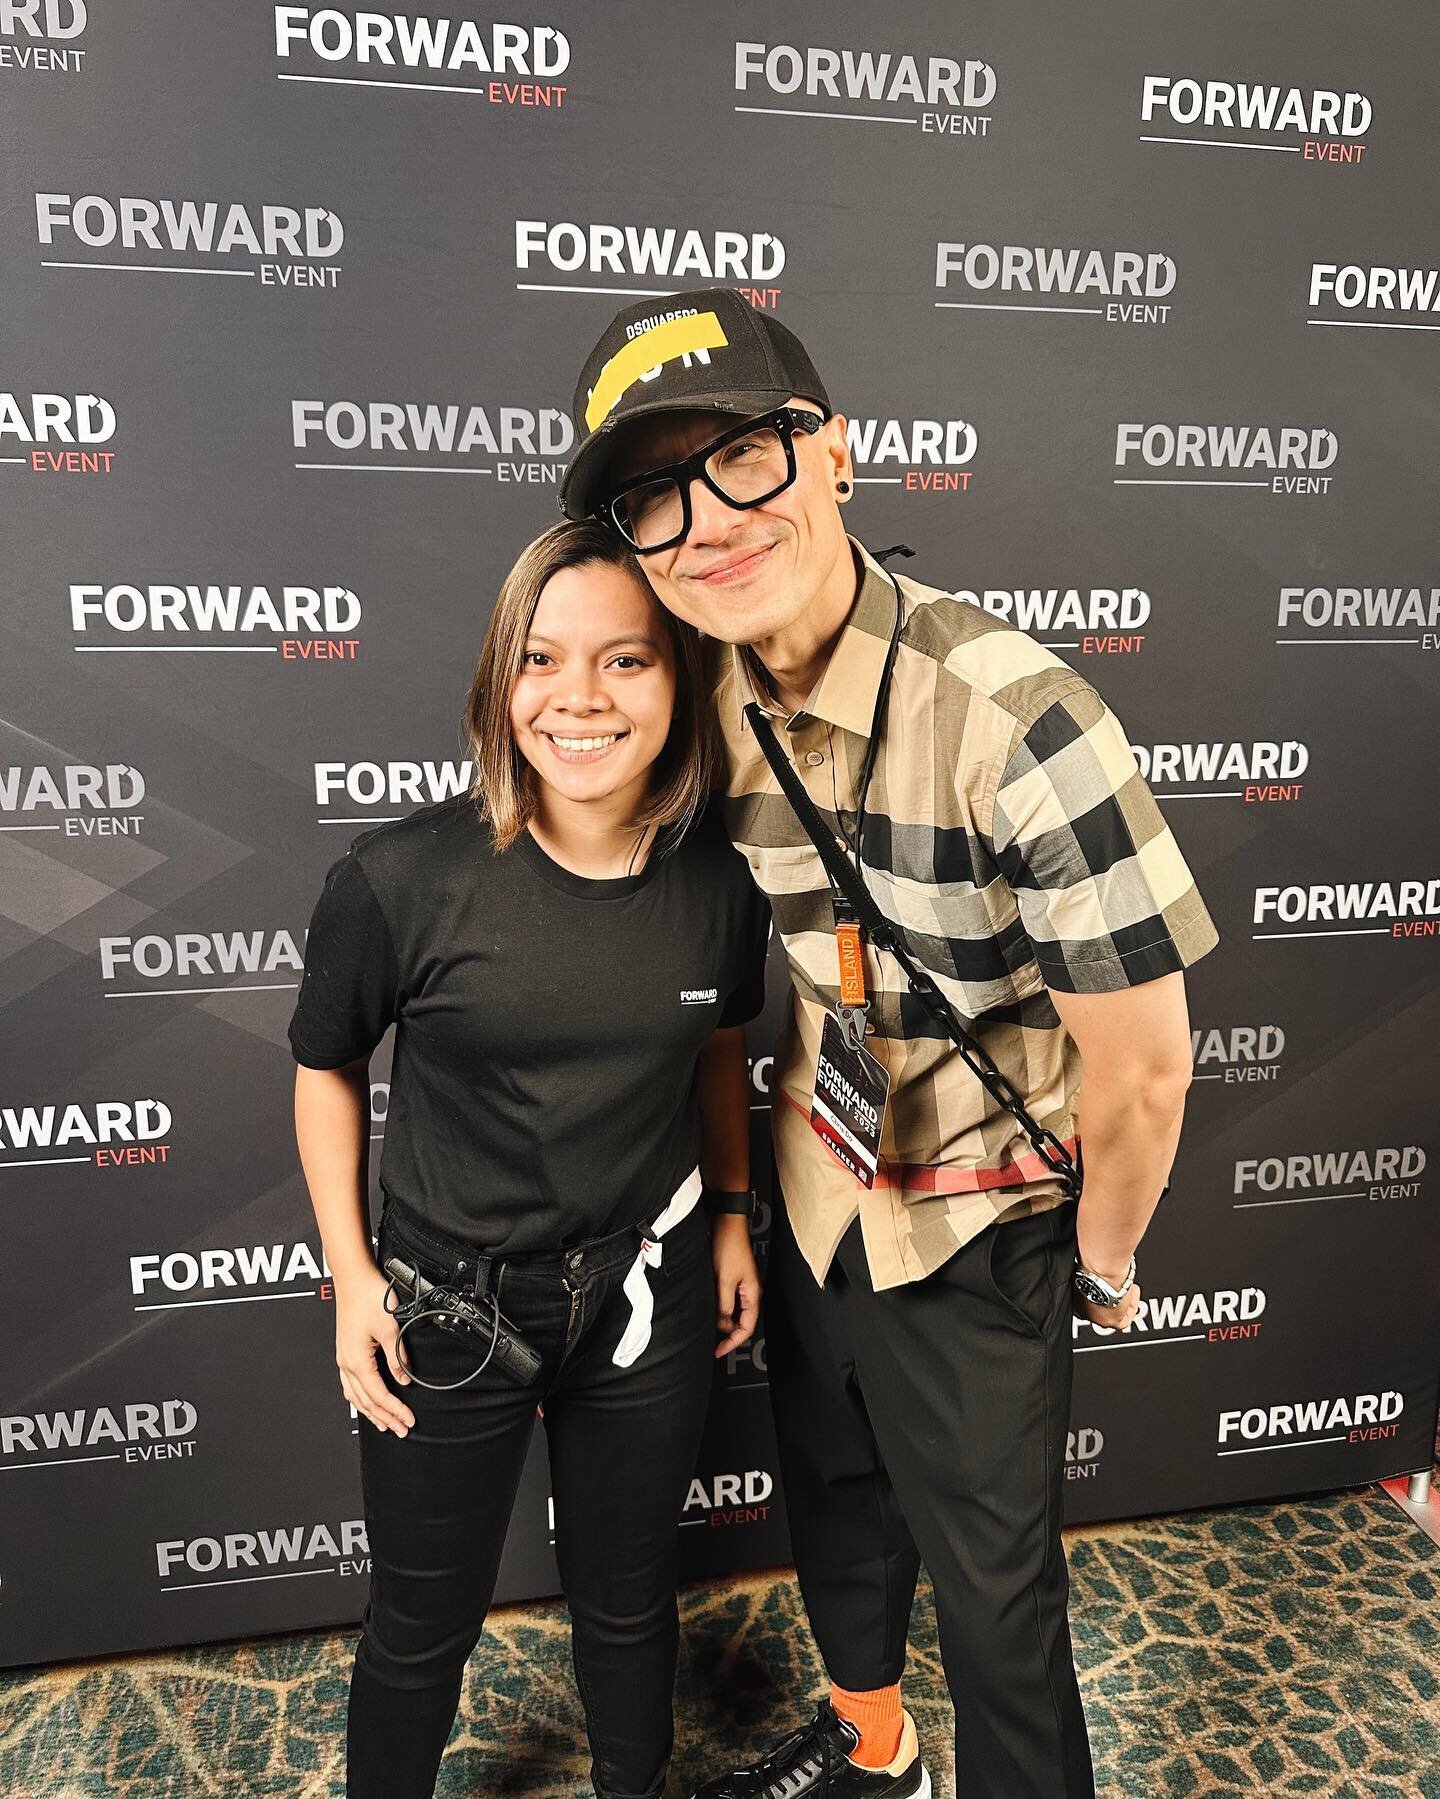 Can you imagine how joyful the heart of a creative would be when meeting @thechrisdo ?

Yep! That was totally ME! I always look back at how I got started and my resources were only the internet (and that was just a few years ago!). I knew I lacked so